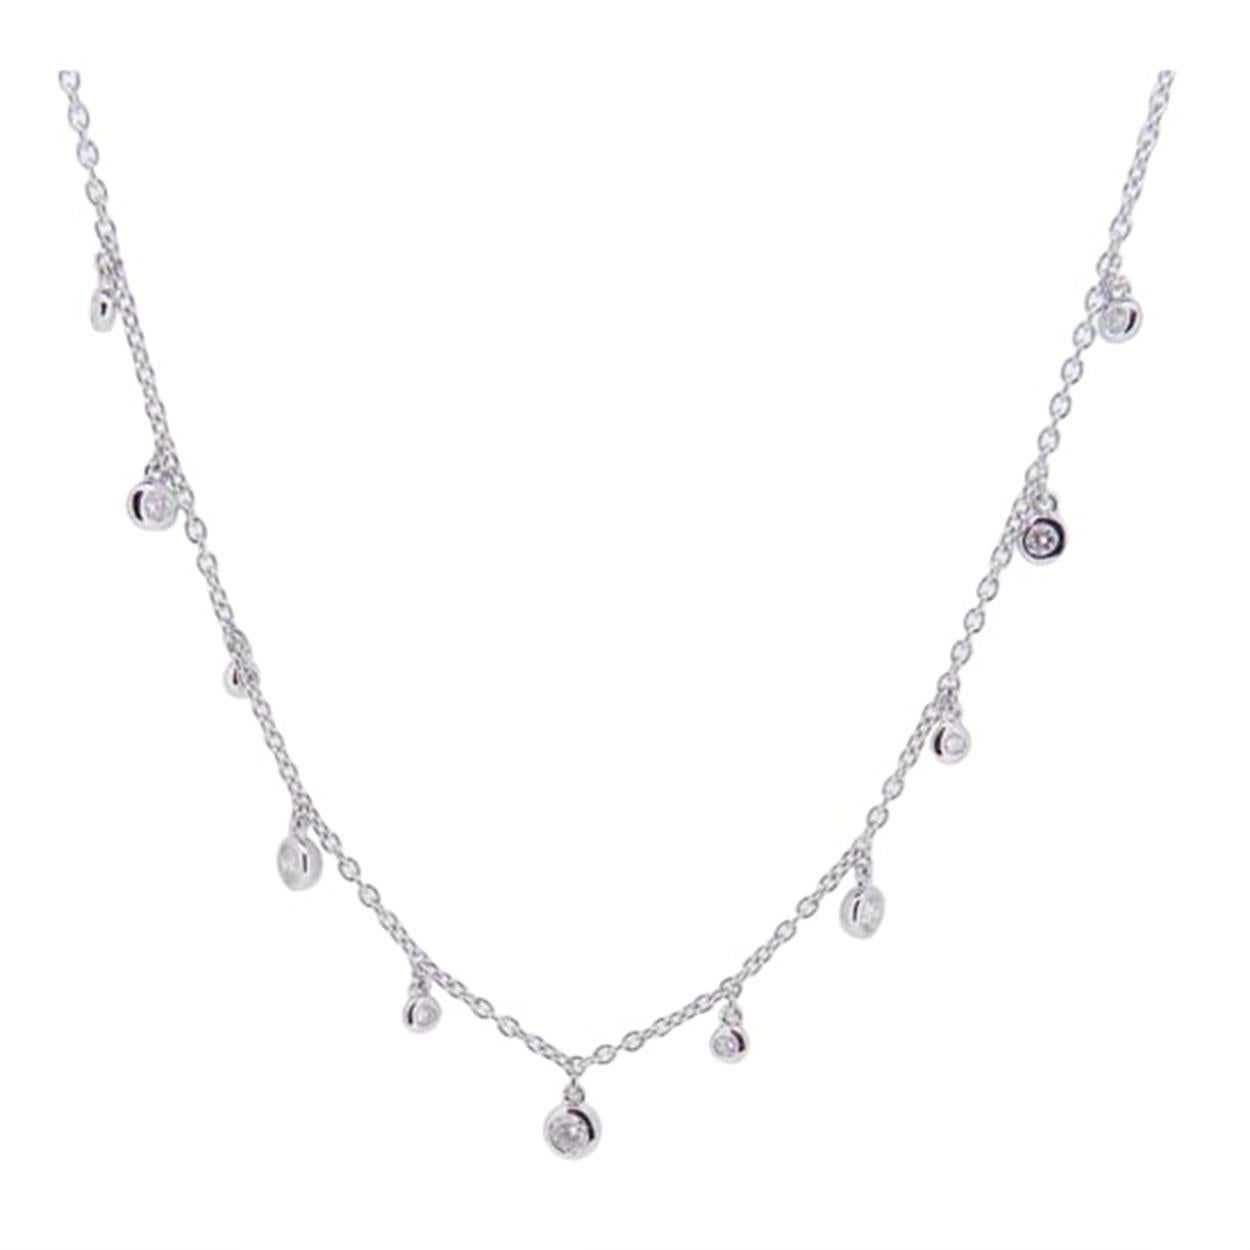 Diamond necklace/pendant, all with a high polish finish. Available in 18K White Gold. 

Necklace Information
Diamond Type : Natural Diamond
Metal : 18K
Metal Color : White Gold
Diamond Carat Weight : 0.23ttcw
Diamond color-clarity : SI-Quality /